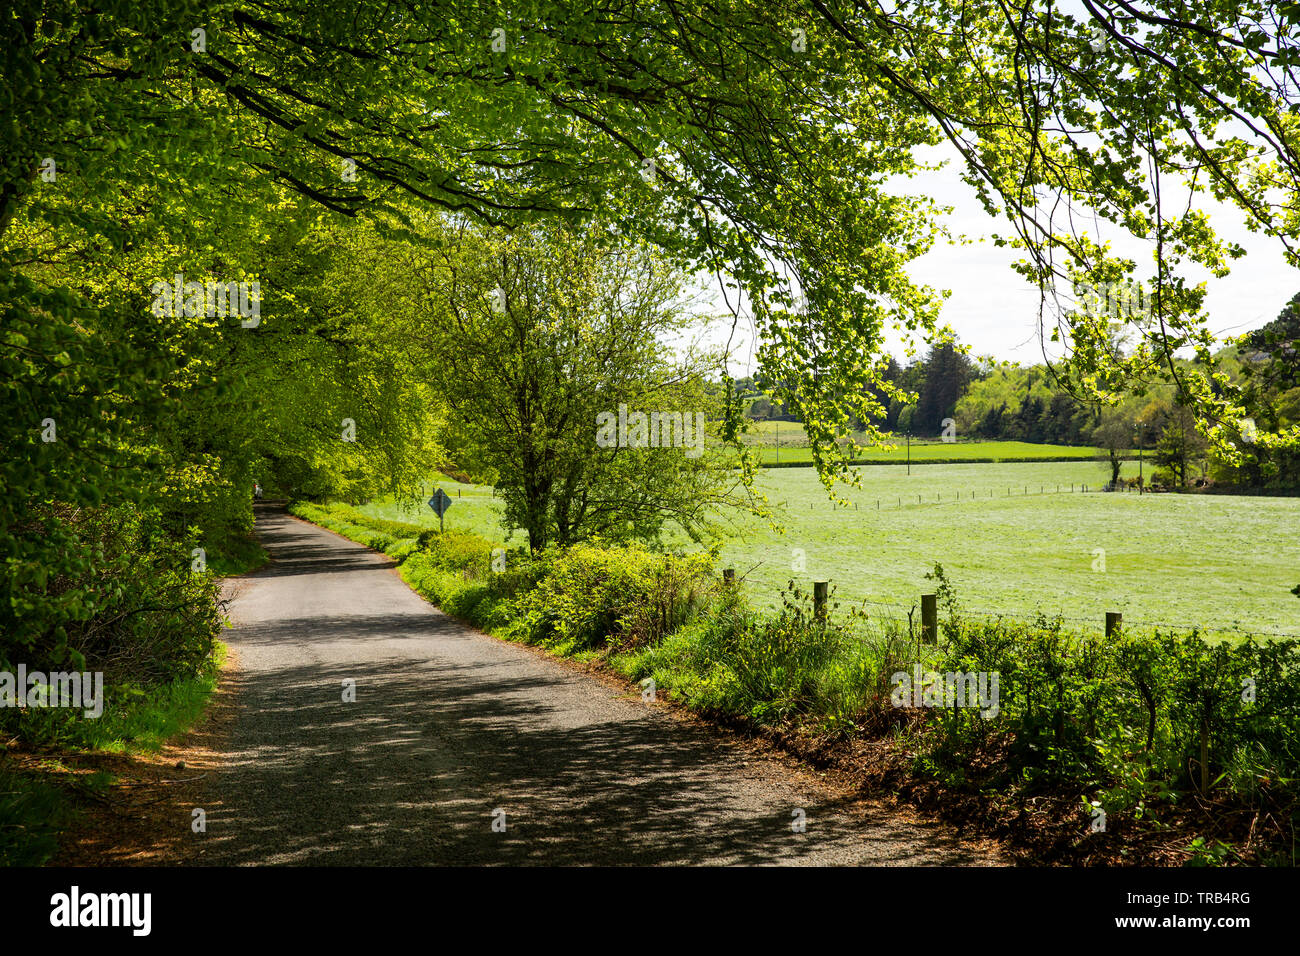 Irland, Co Louth, Halbinsel Cooley, Ravensdale, buche Bäume über Fahrbahn bei ravensdale Forest Park Stockfoto